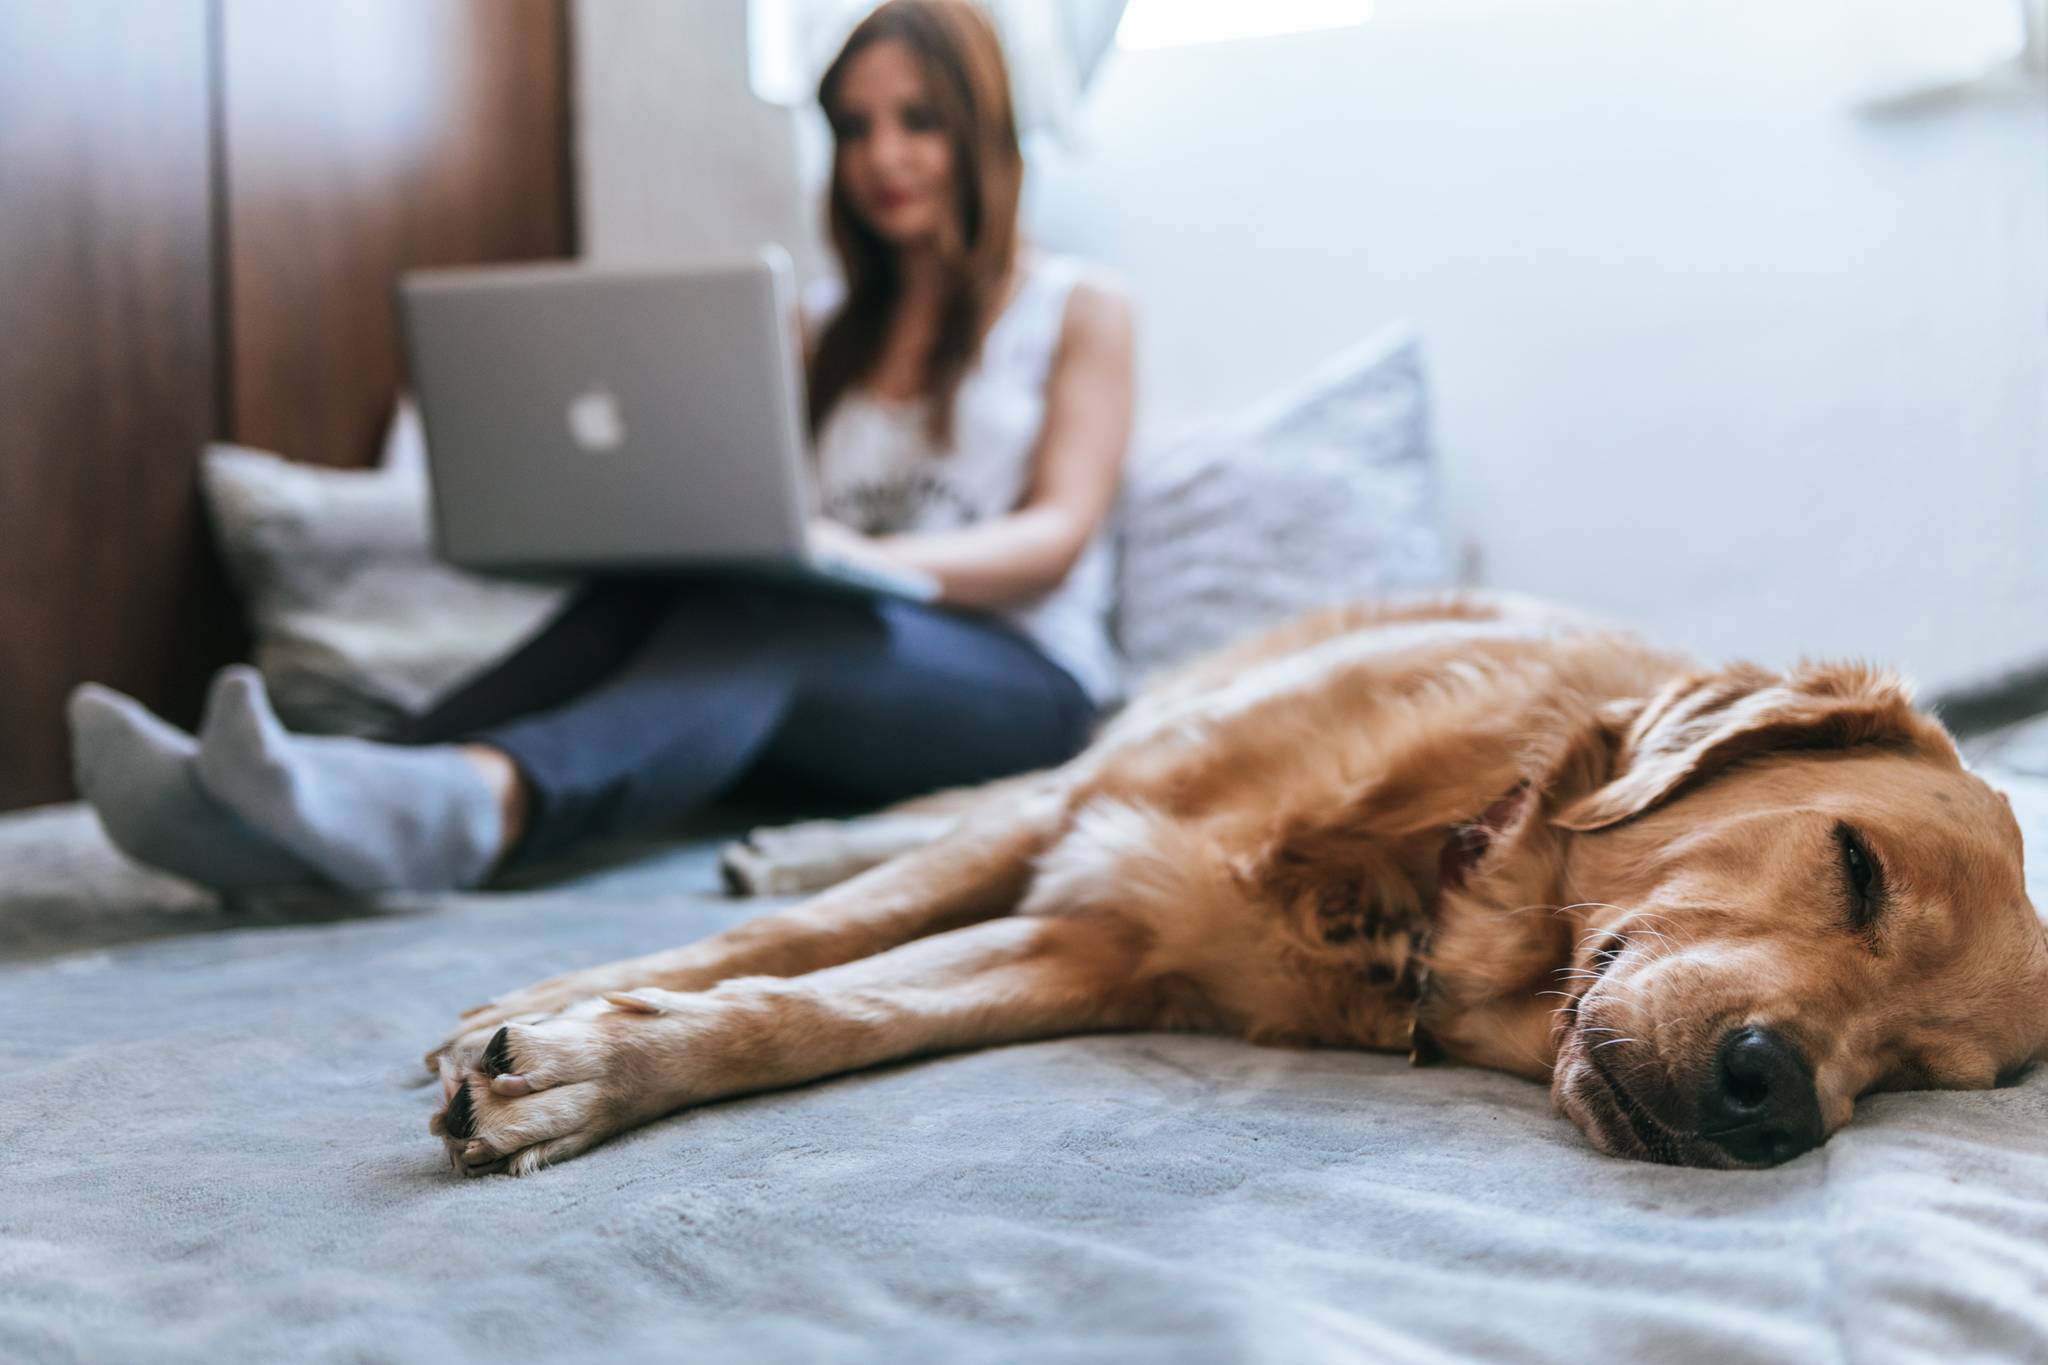 Pet-friendly work policies and perks attract Gen Yers